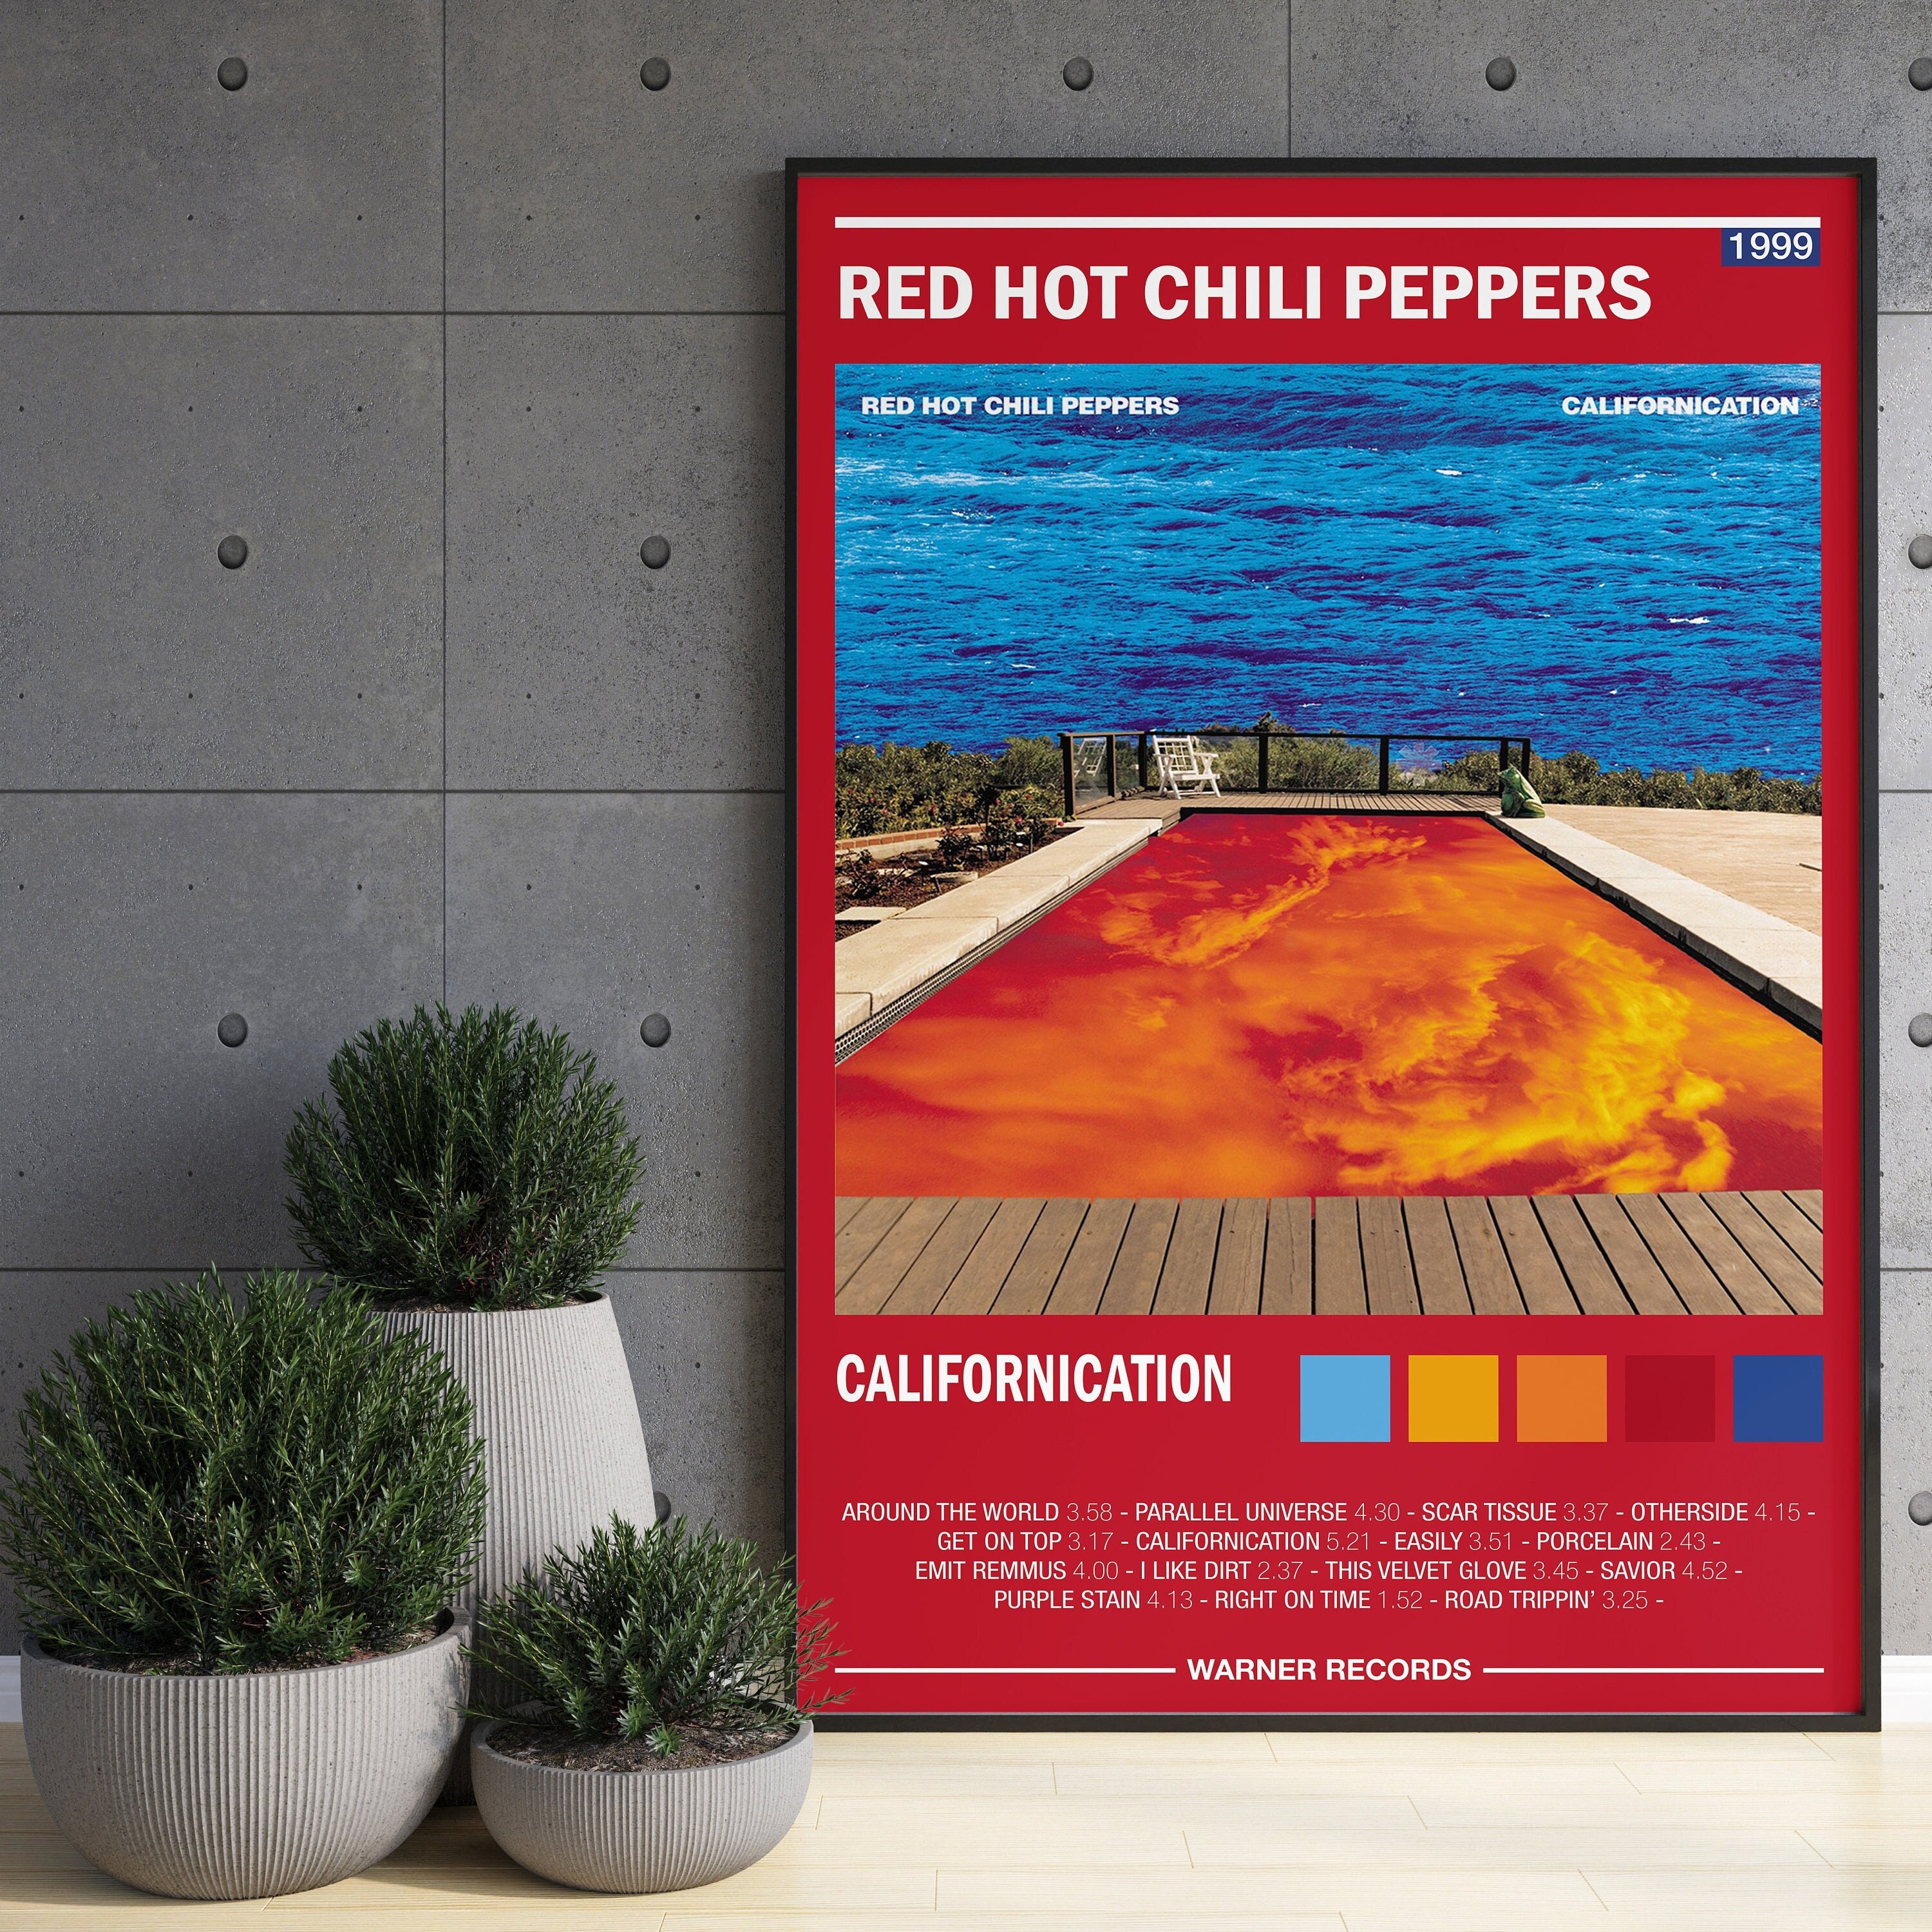 Red Hot Chili Peppers - Californication - Album Poster